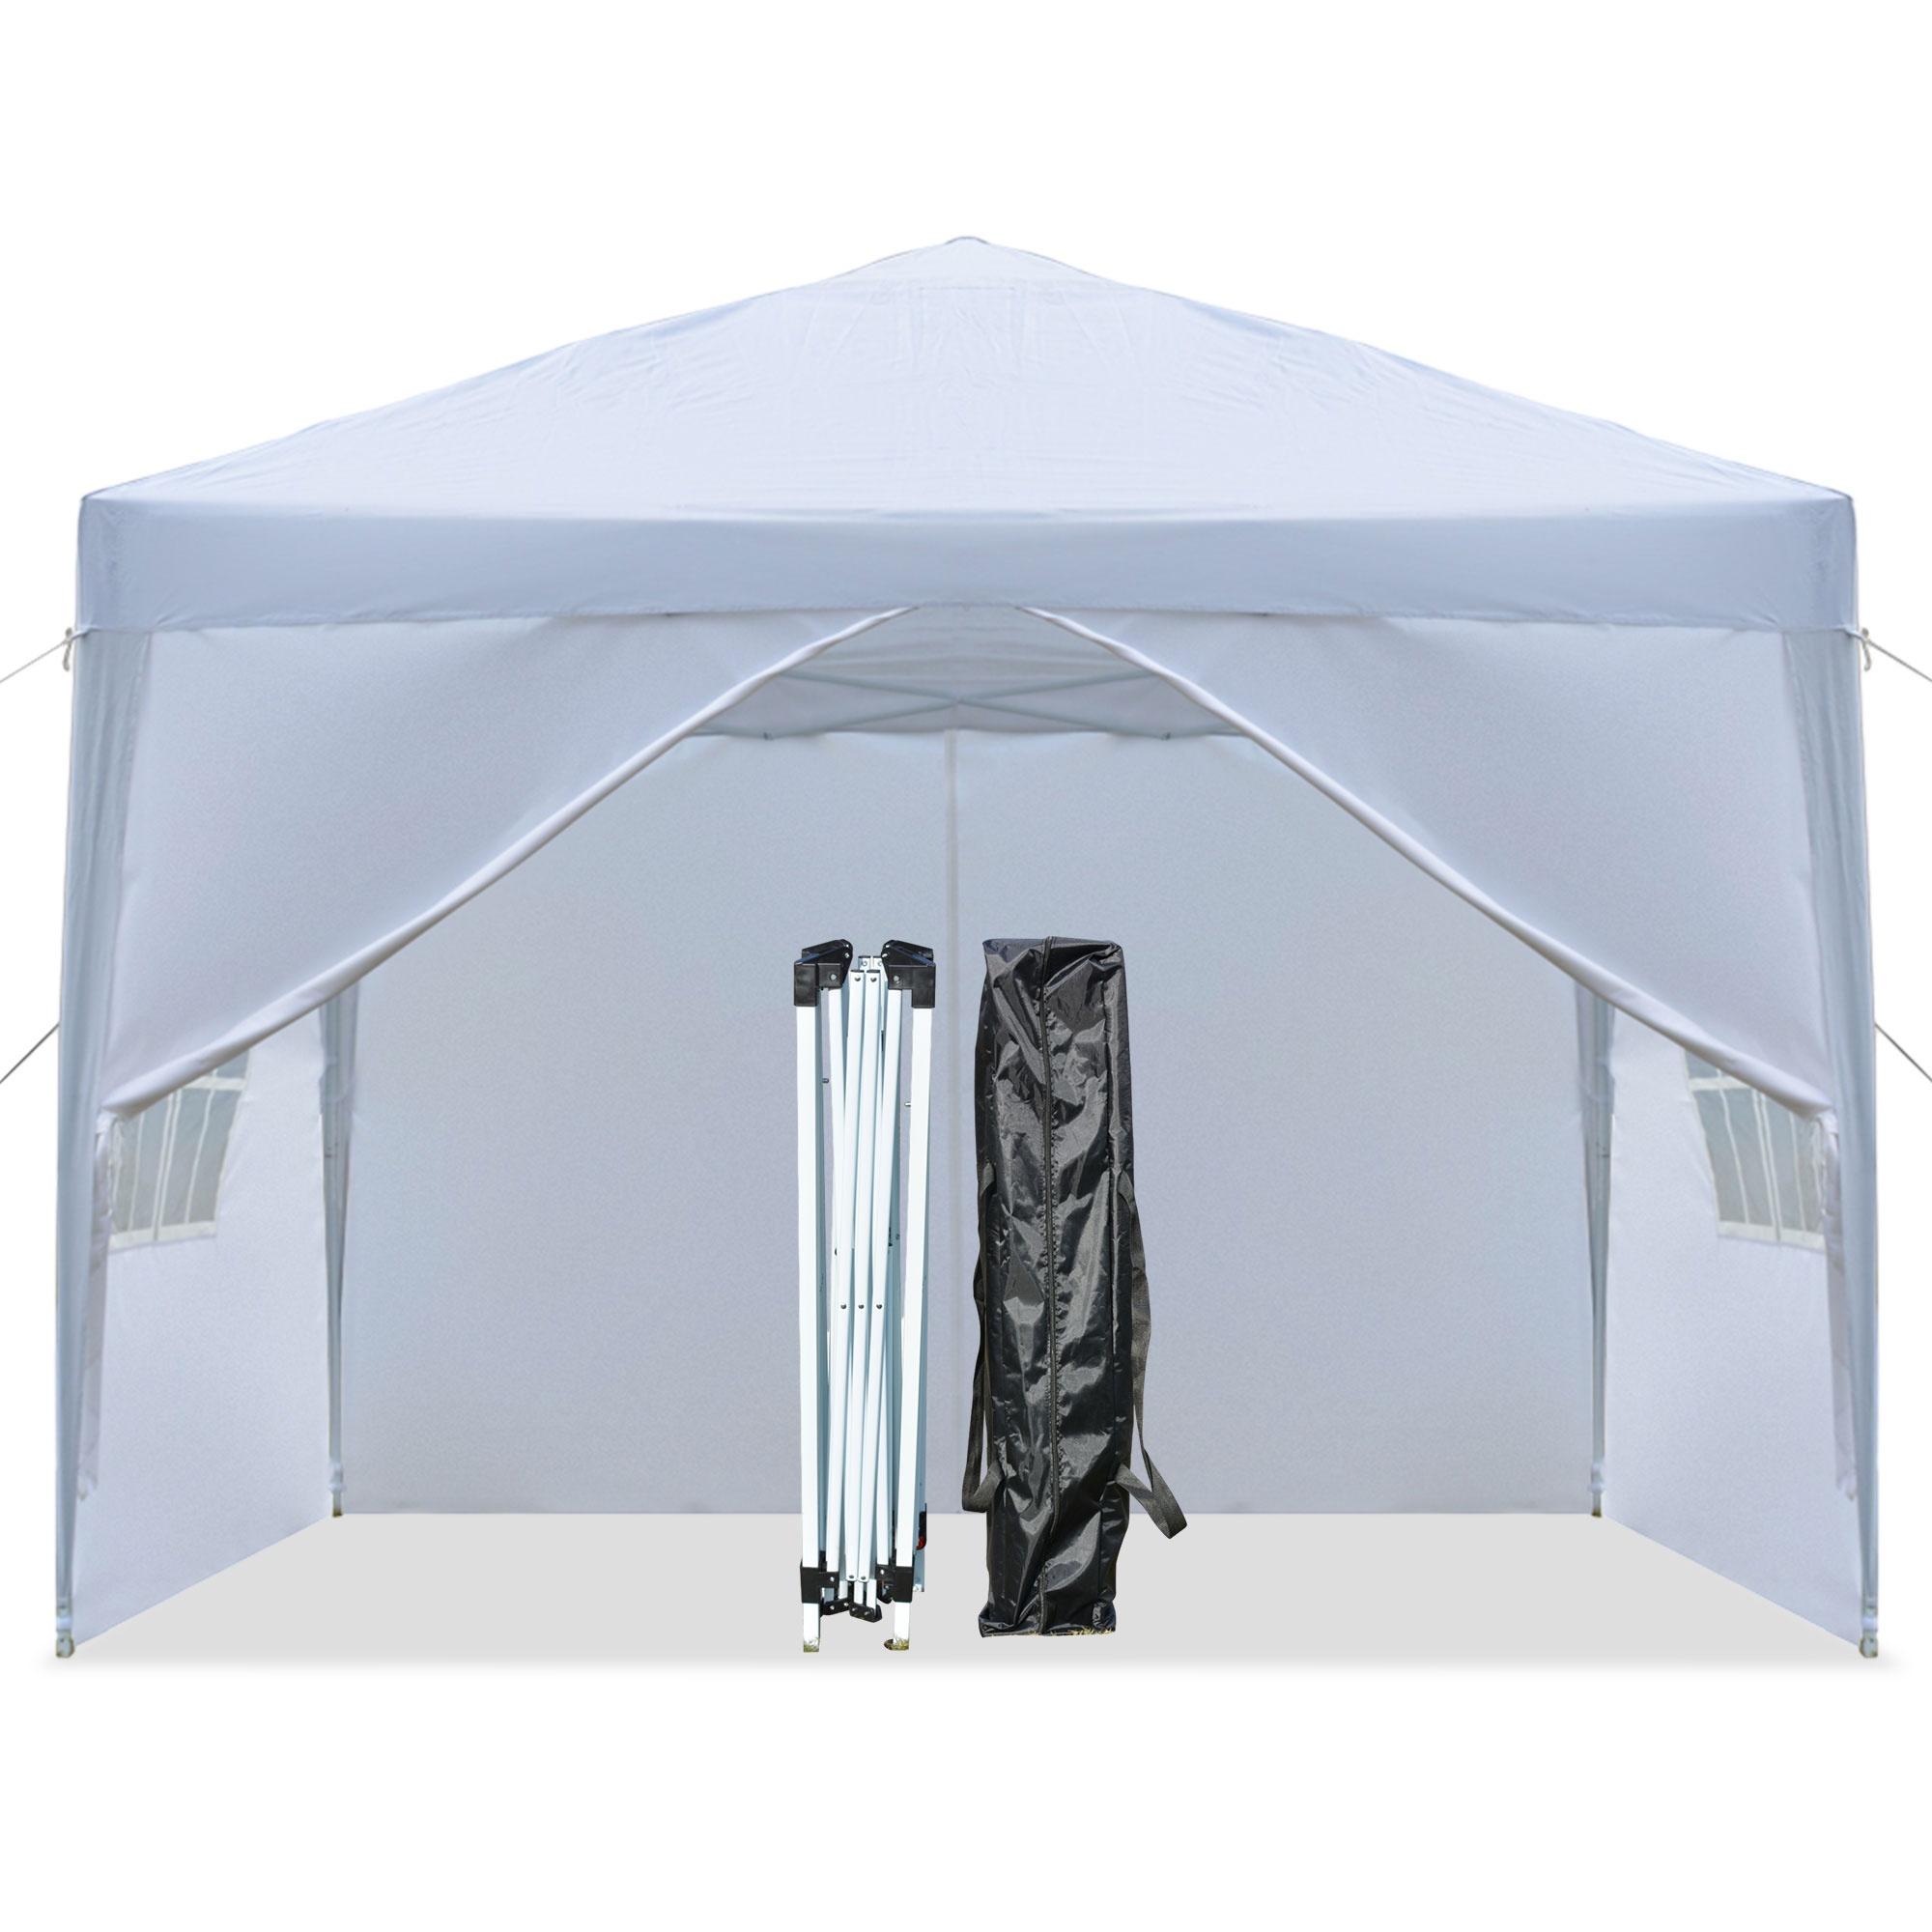 10'x10' Outdoor Wedding Party Tent with 4 Sidewalls, SEGMART Pop Up Canopy Tent with 3 Adjustable Heights, Portable Waterproof Instant Patio Gazebo Tent with Carrying Bag for Garden Pavilion - image 2 of 9